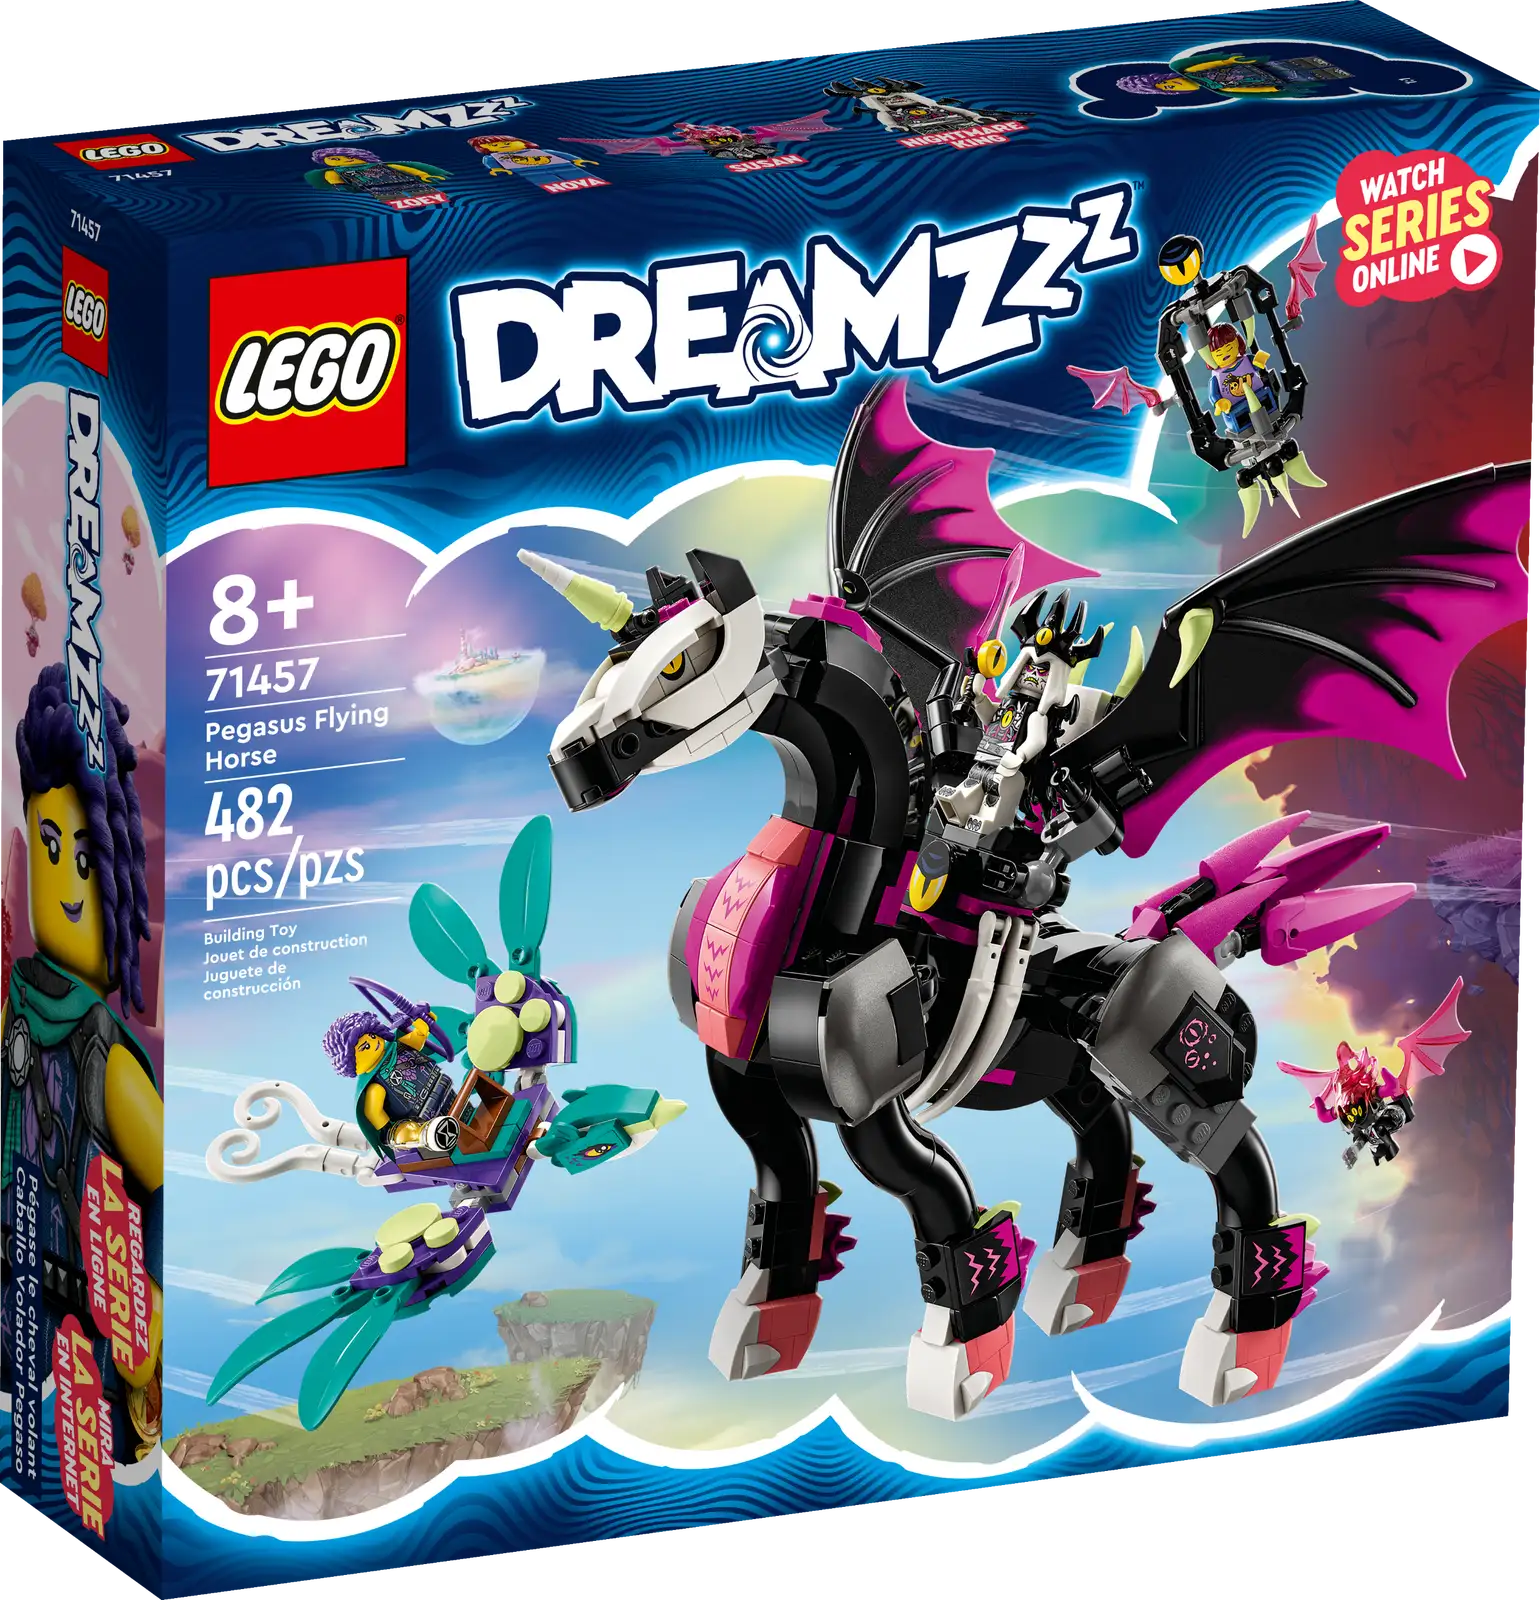 LEGO DREAMZzz tried and tested